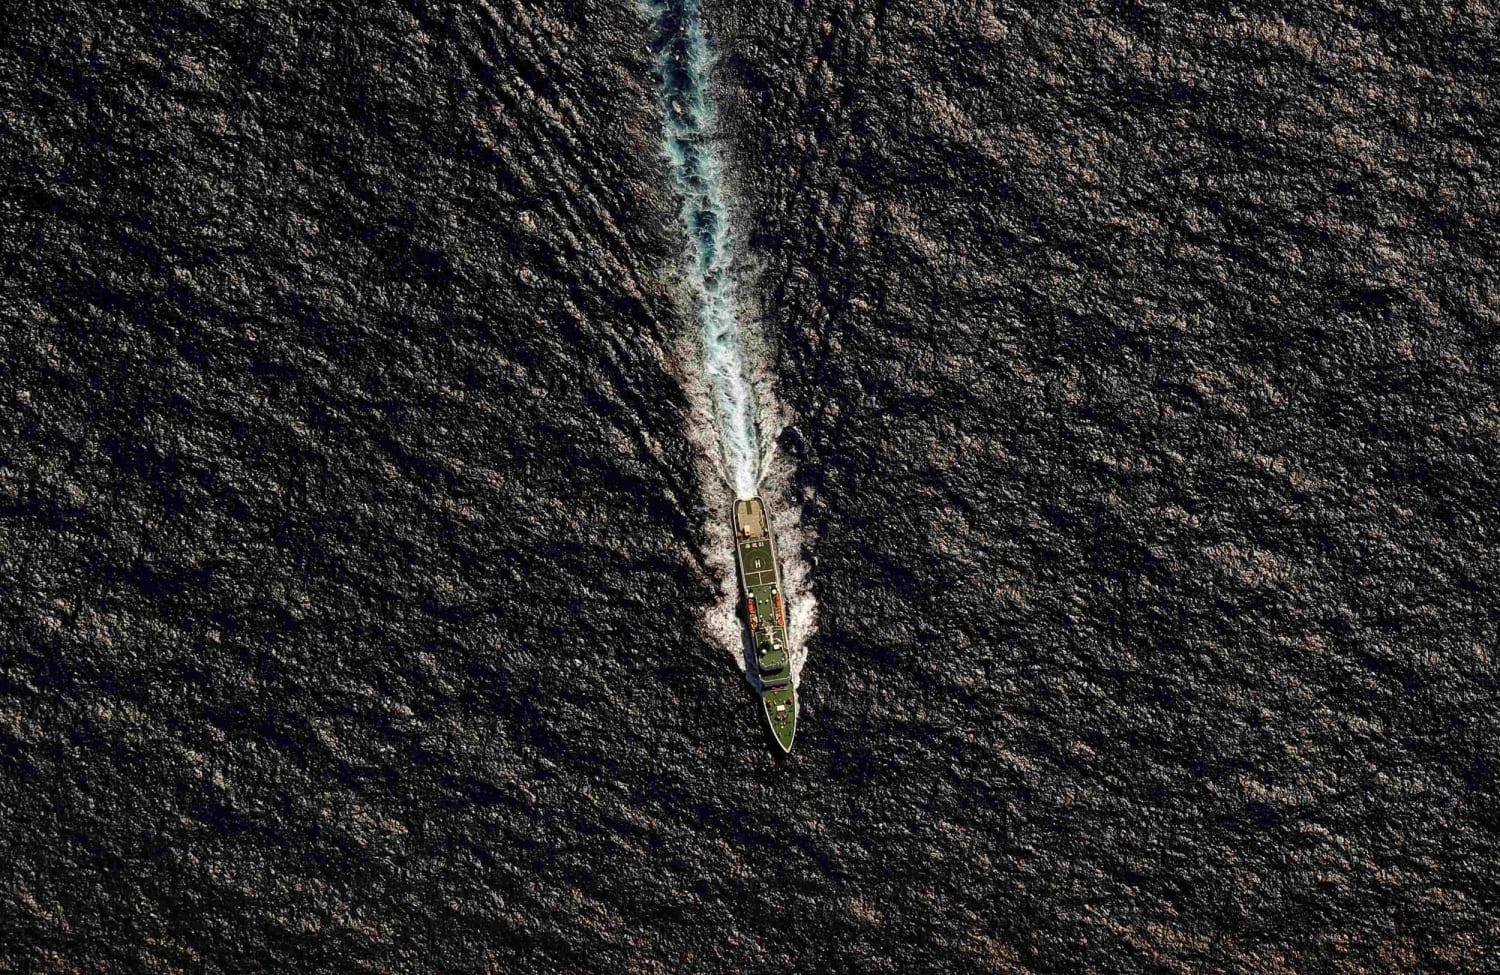 Is Oil Slick Found Near Ping Site Linked to Missing MH370? - NBC.